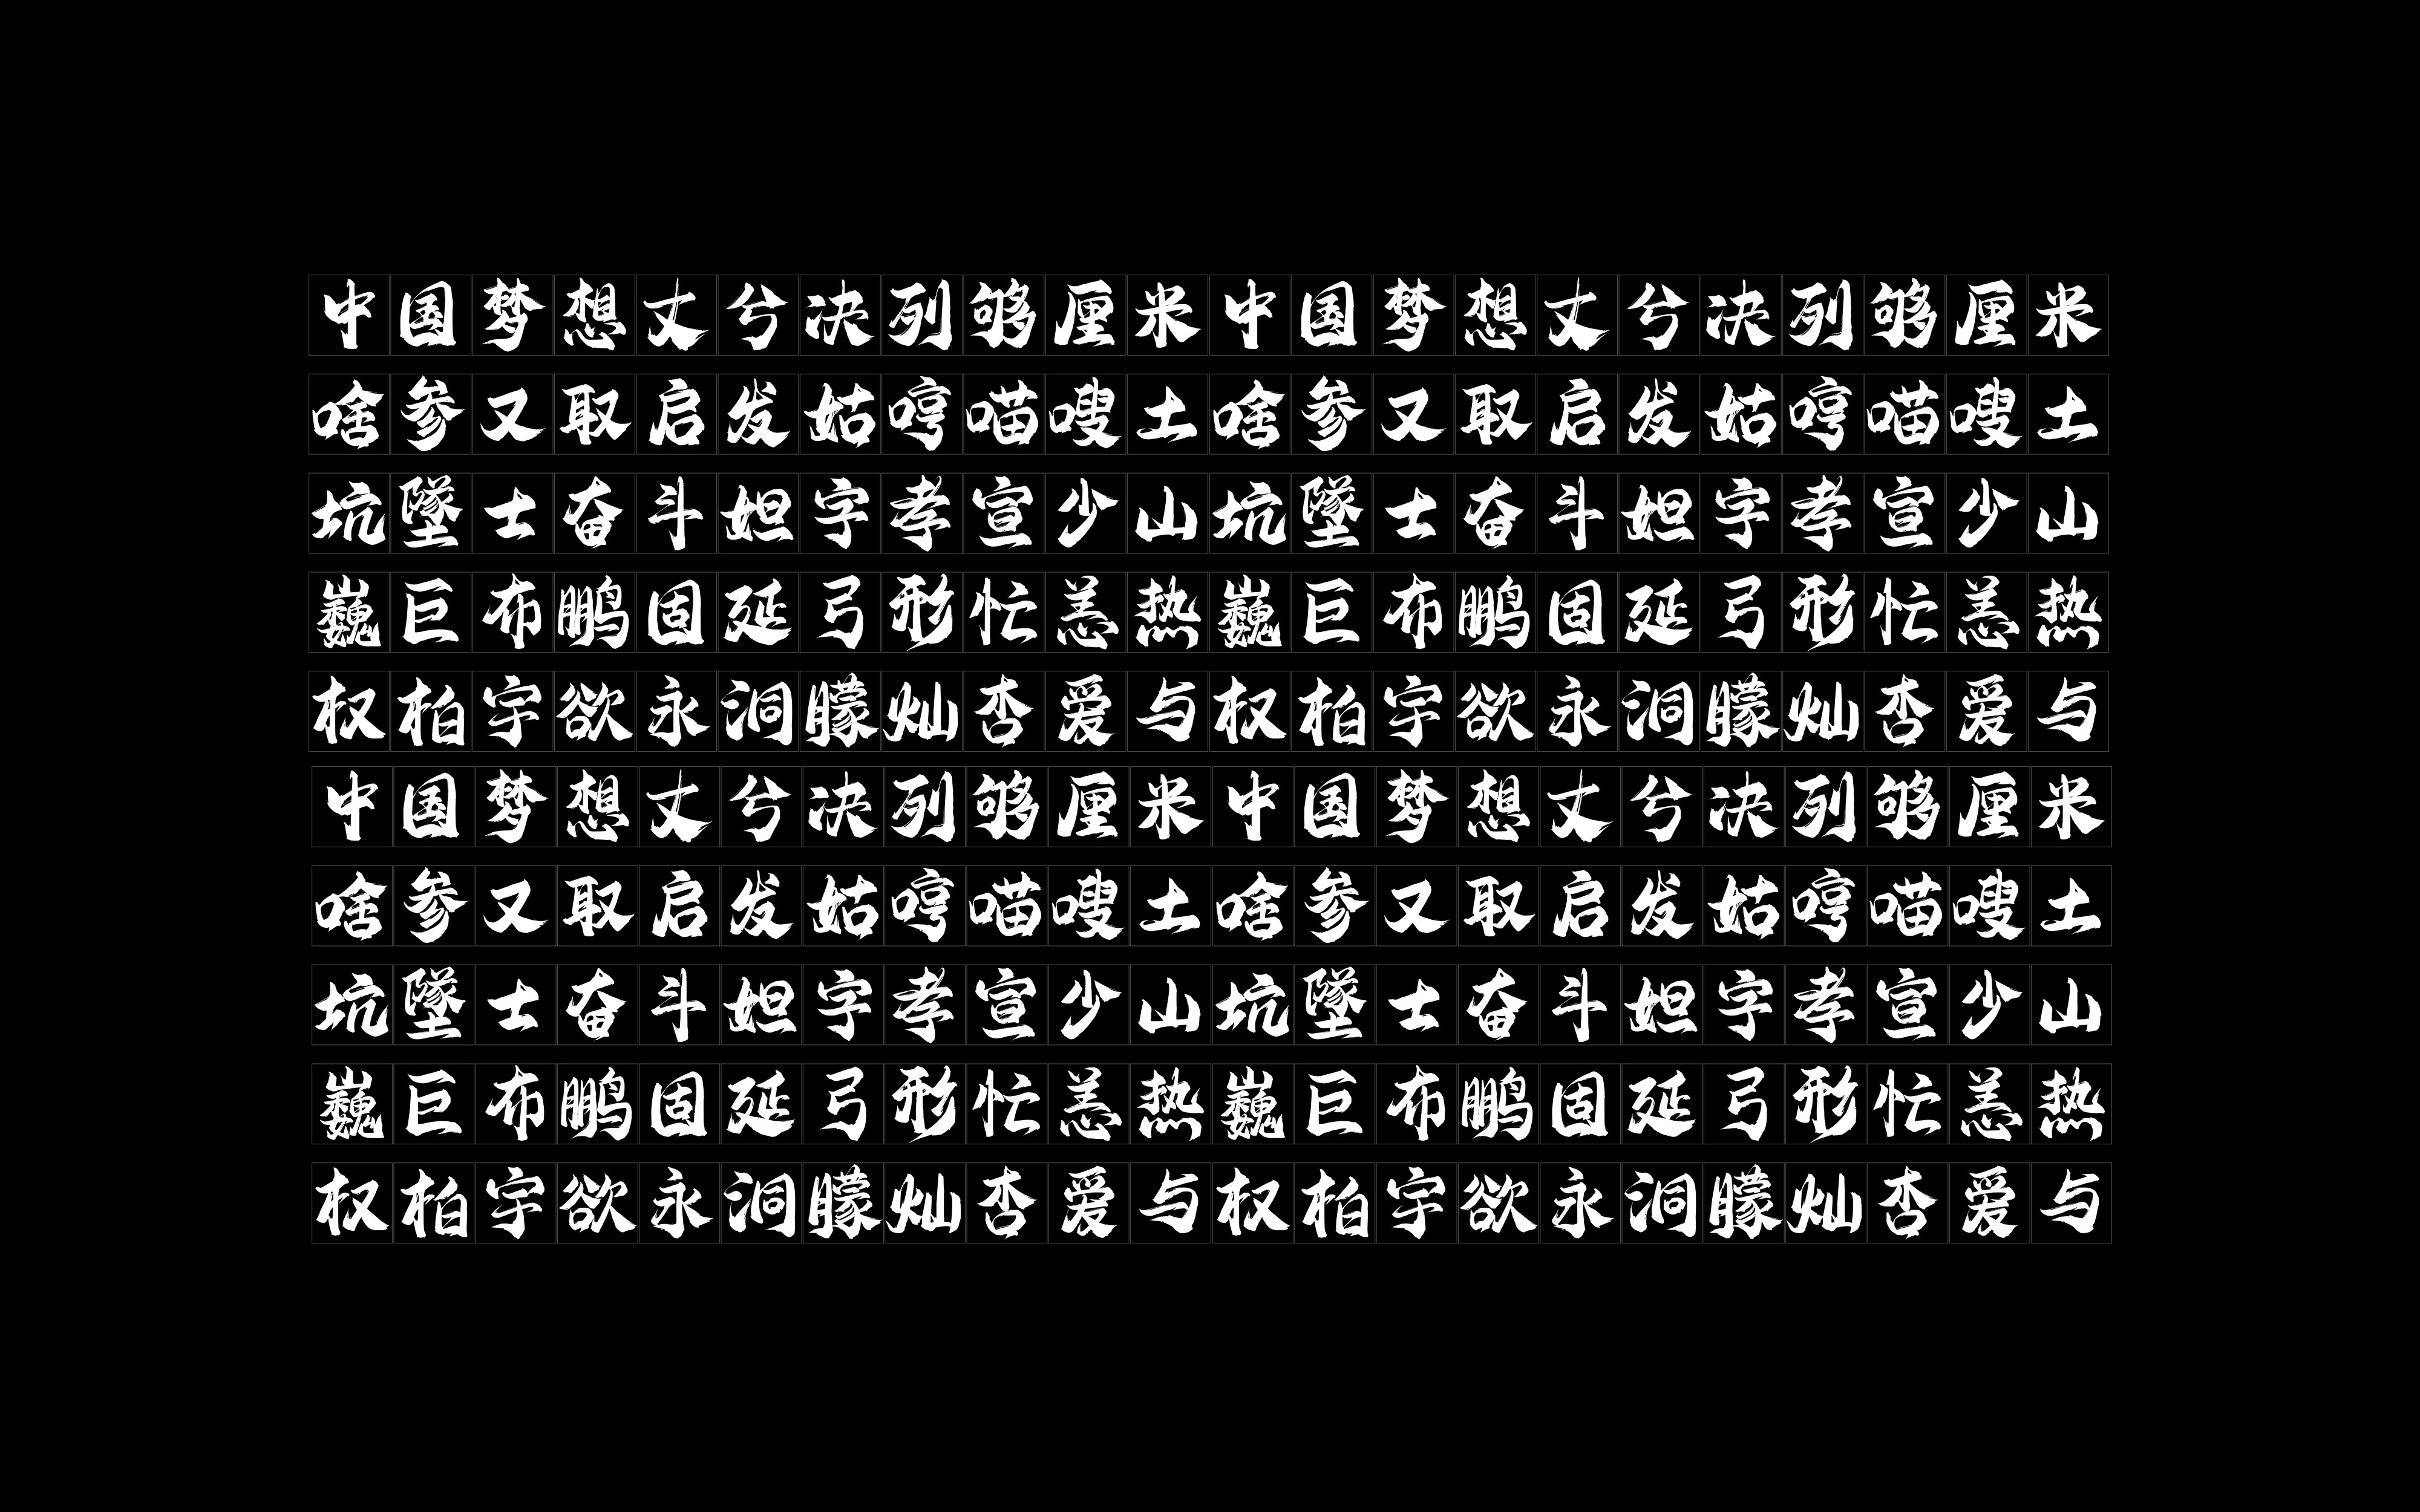 Chinese simple+Chinese traditional+English characters have a total of 10279 characters